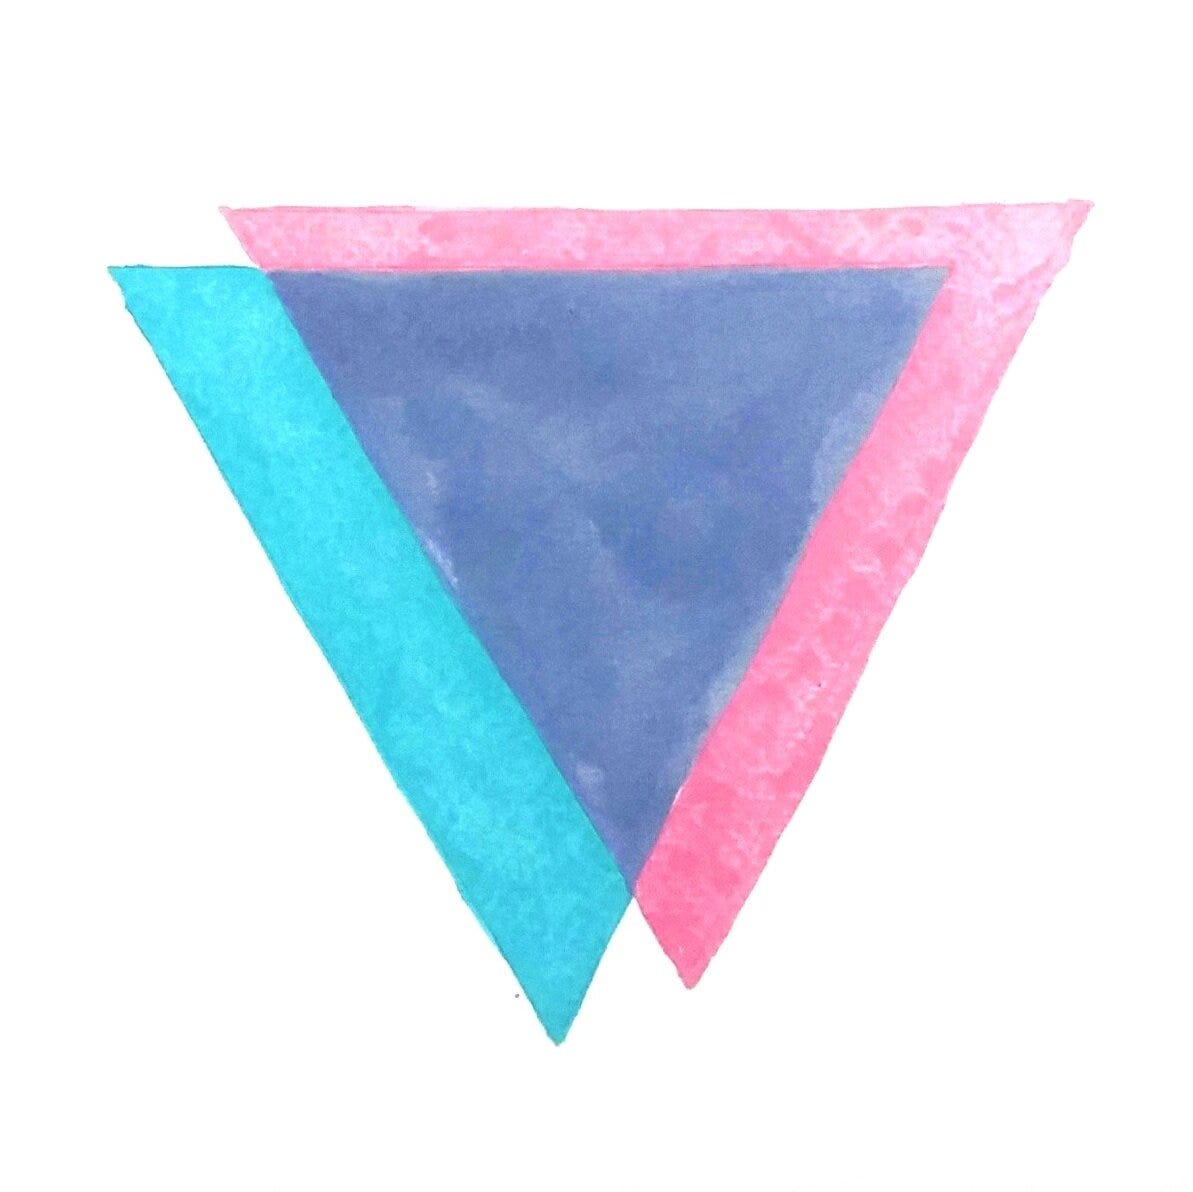 Biangles, 1985The Biangles were possibly the first symbol for bisexual visibility. Within a couple years of its creation by Liz Nania, originally on pins, buttons, and t-shirts, it began to be adopted worldwide. Soon after the creation of the rainbow flag, the three colors of the Biangles became the basis in for the bisexual flag. The colors of the overlapping triangles represent attraction to both, or all, sexes, symbolized by pink and blue, traditionally associated with girls and boys in the US; and lavender represents the queerness of bisexuality, referencing the Lavender Menace in the 1970s and other cultural associations with lavender and queerness in the 1980s and 1990s. The triangle references the pink triangle adopted by LGBTQ+ communities in the 1980s in the US as a form of queer resistance, as it was originally used in Nazi Germany Germany in the 1930s and 40s to identify gay men.